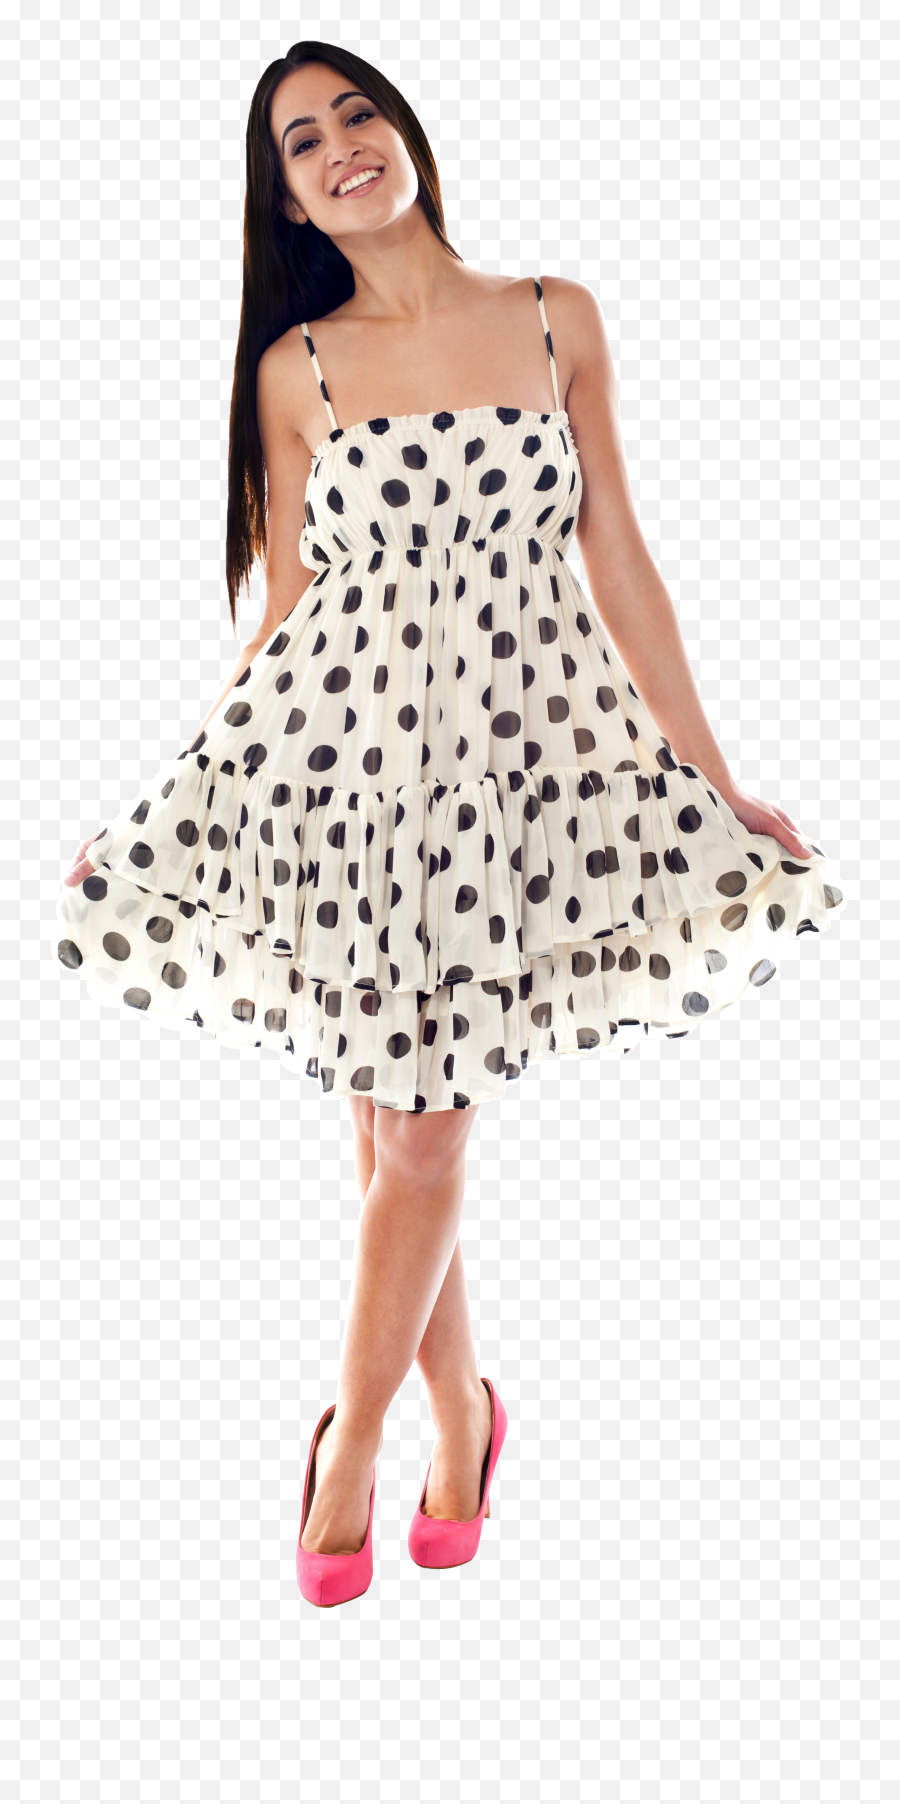 Download Fashion Girl Png Image For Free - Portable Network Graphics,Fashion Png